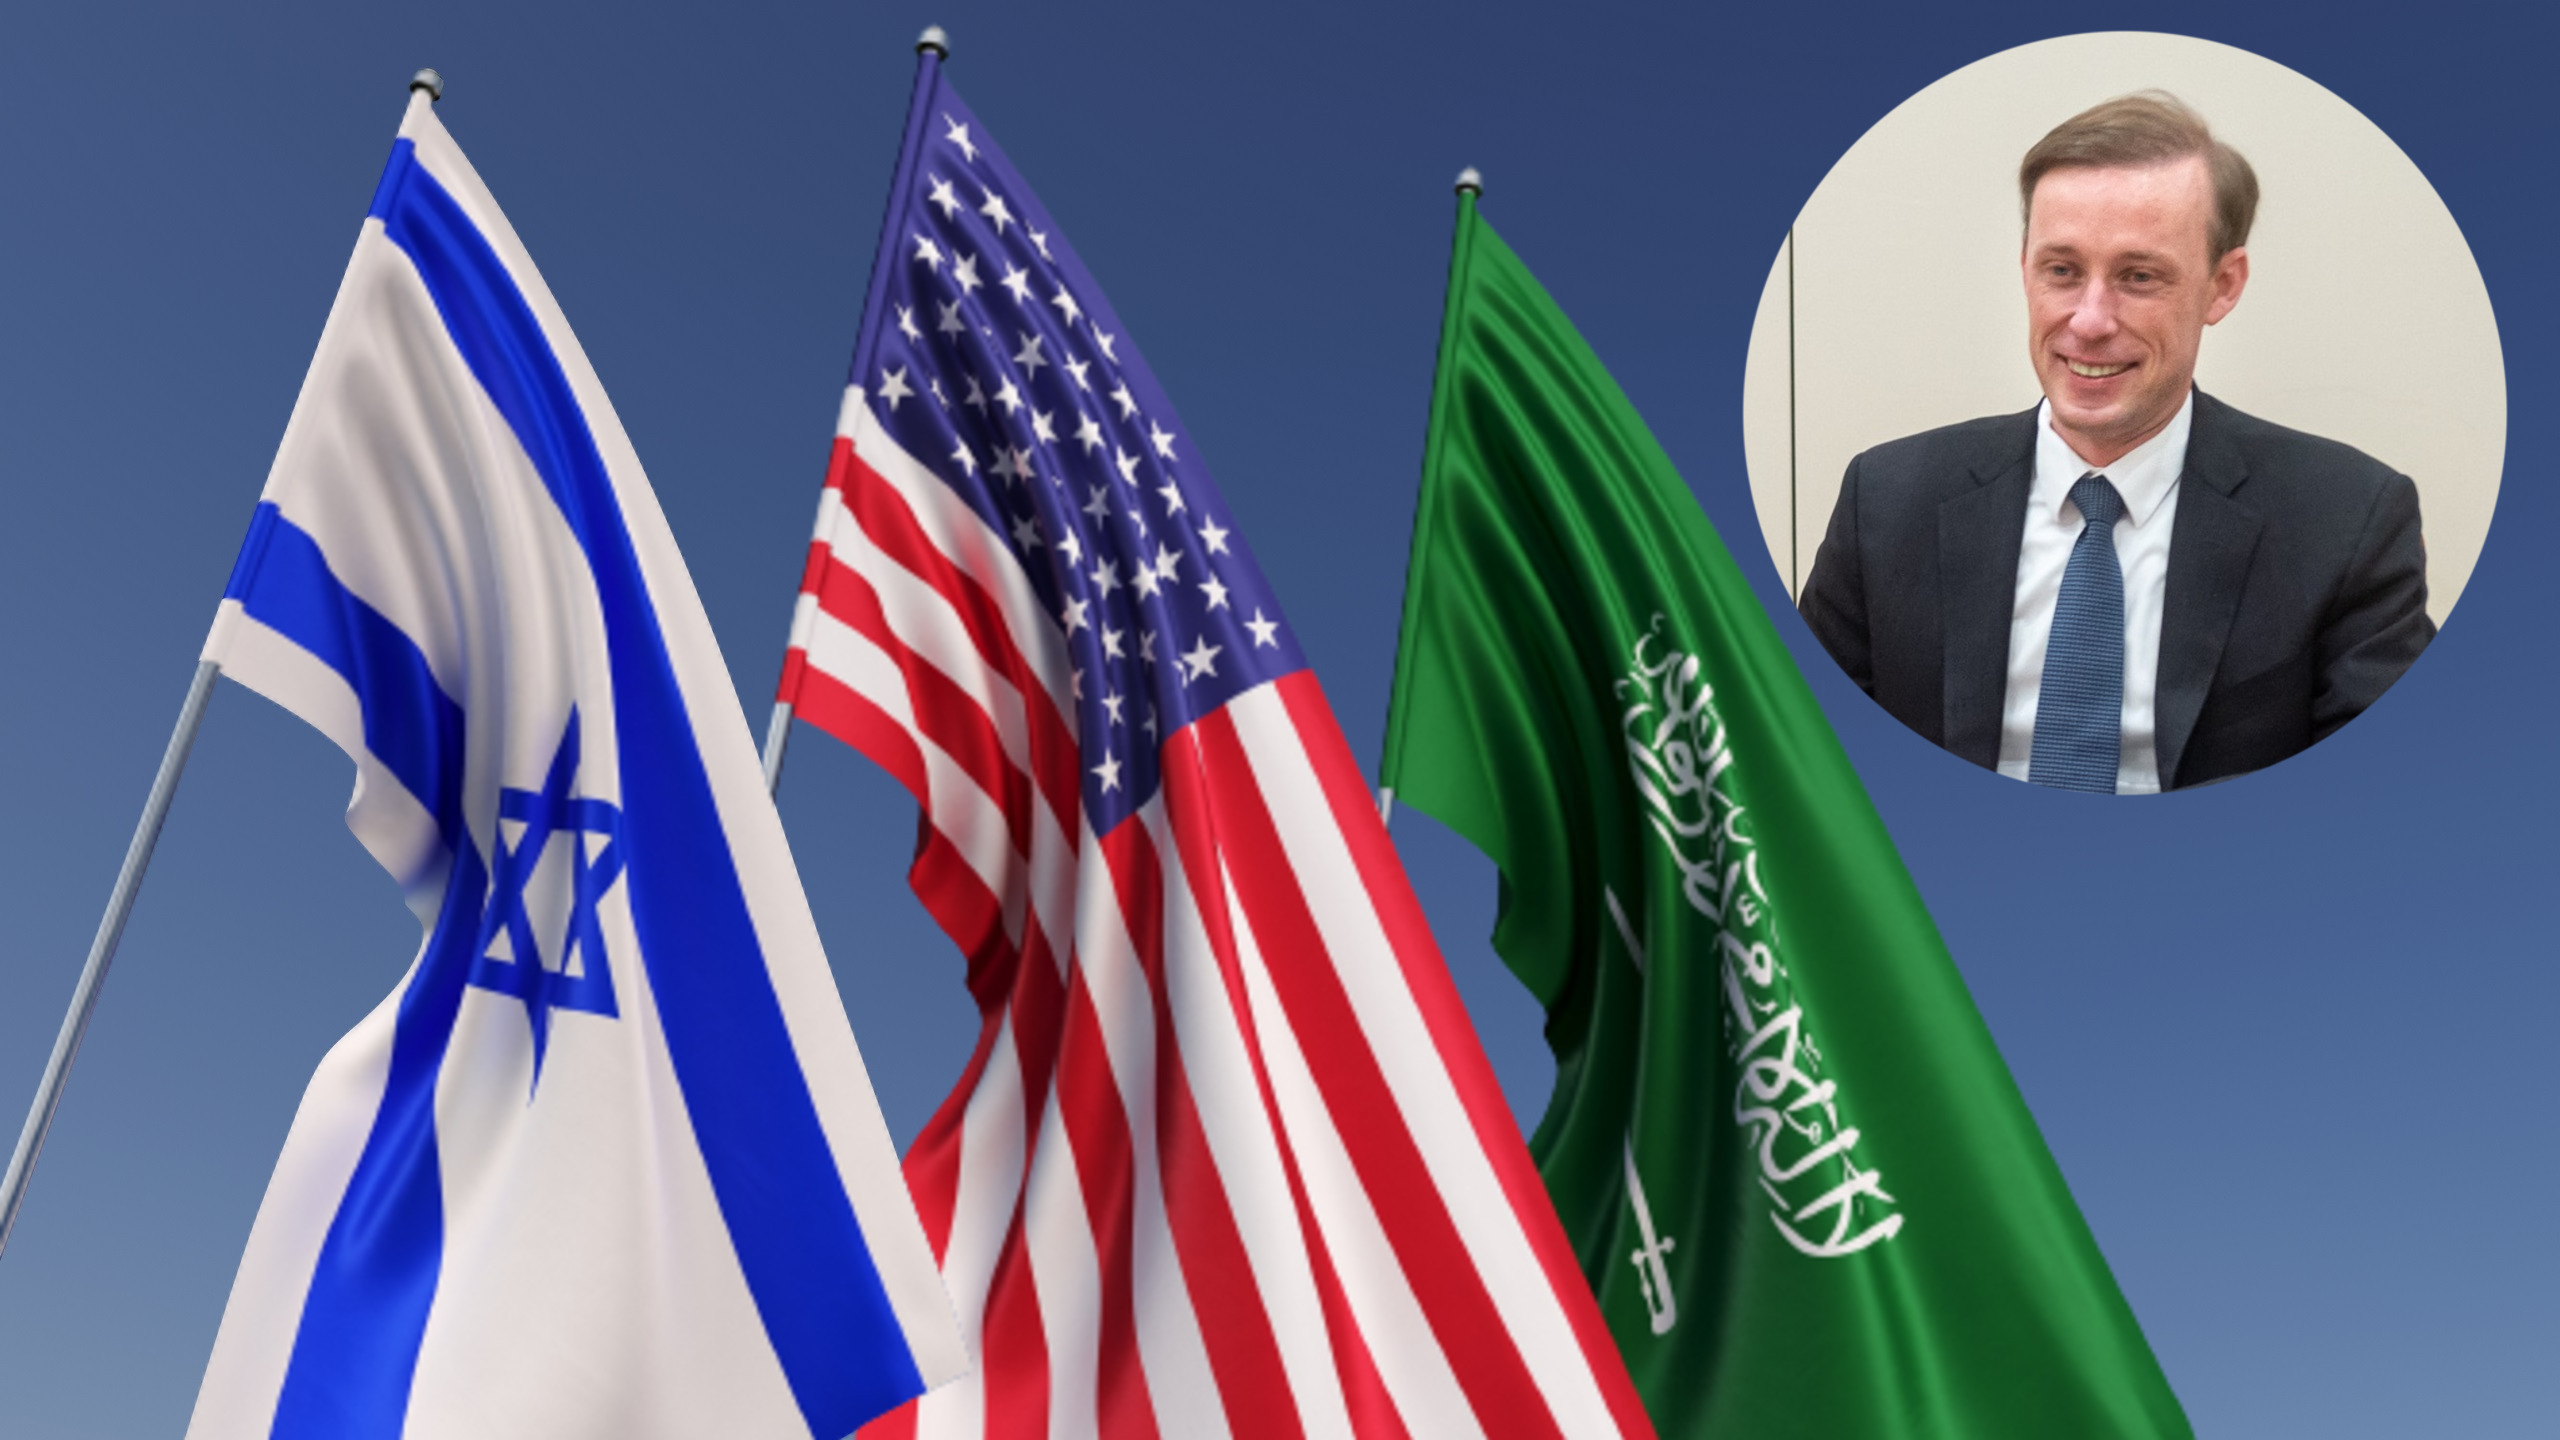 Israeli Normalization With Saudi Arabia May Require Concessions to Palestinians